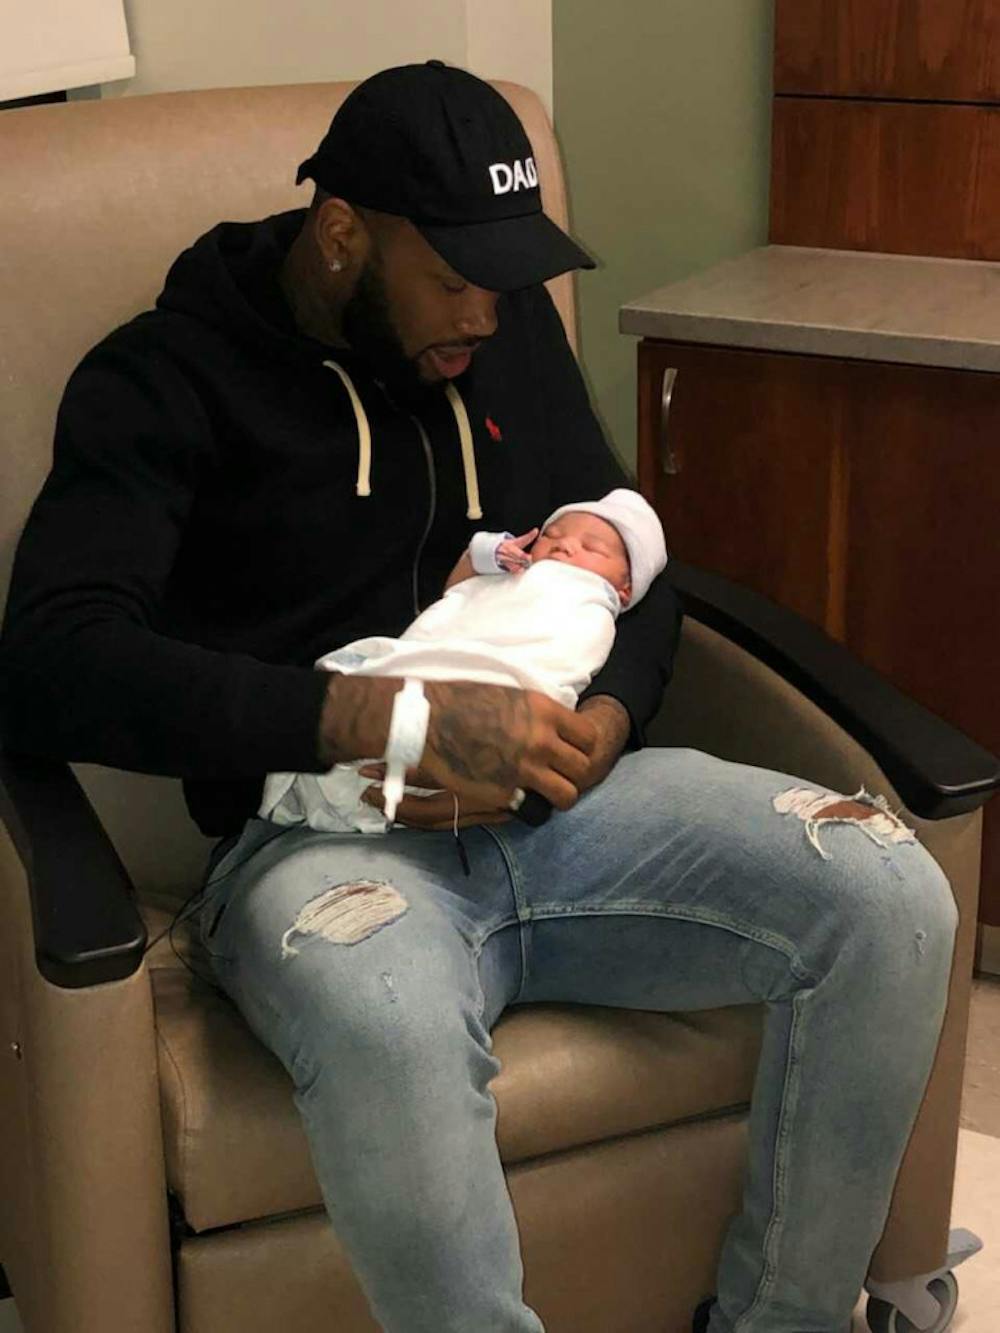 <p class="p1"><span class="s1">Mike Parks, the center for the UofM’s men’s basketball team, holds his son, Zakari Daniel Parks, who was born Jan. 5. Parks said his son will motivate him to work harder.<span class="Apple-converted-space">&nbsp;</span></span></p>